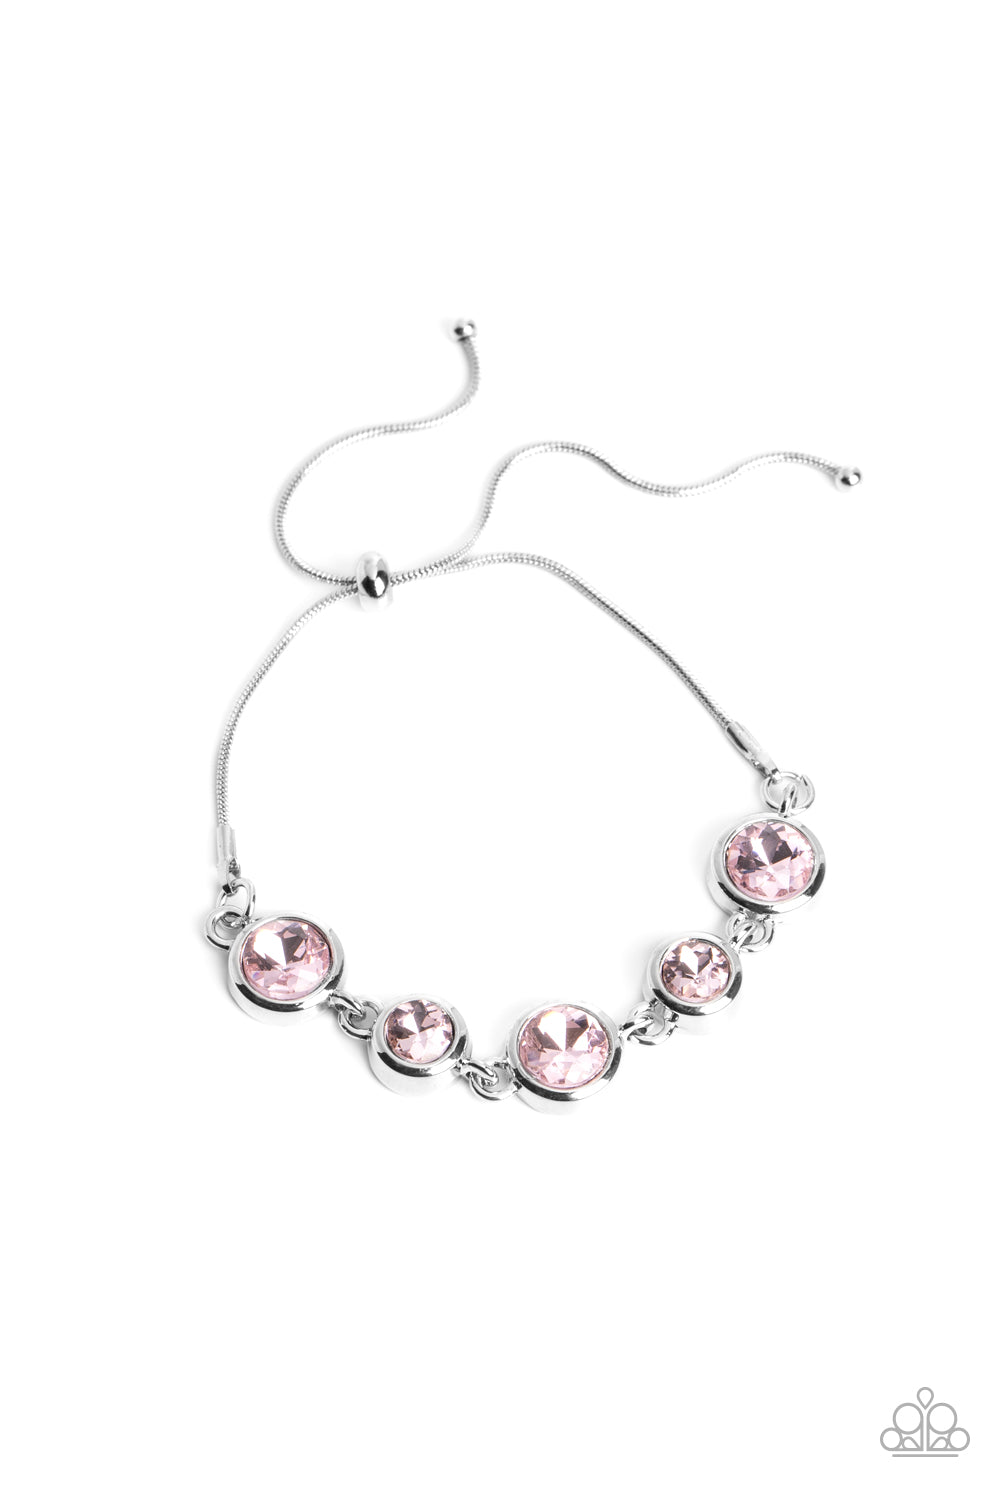 Paparazzi Accessories Classically Cultivated - Pink Varying sizes of classic, round, brilliant-cut pink rhinestones set in thick, circular, silver frames link together around the wrist with glamorous glimmer. The rhinestones attach to a dainty strand of s